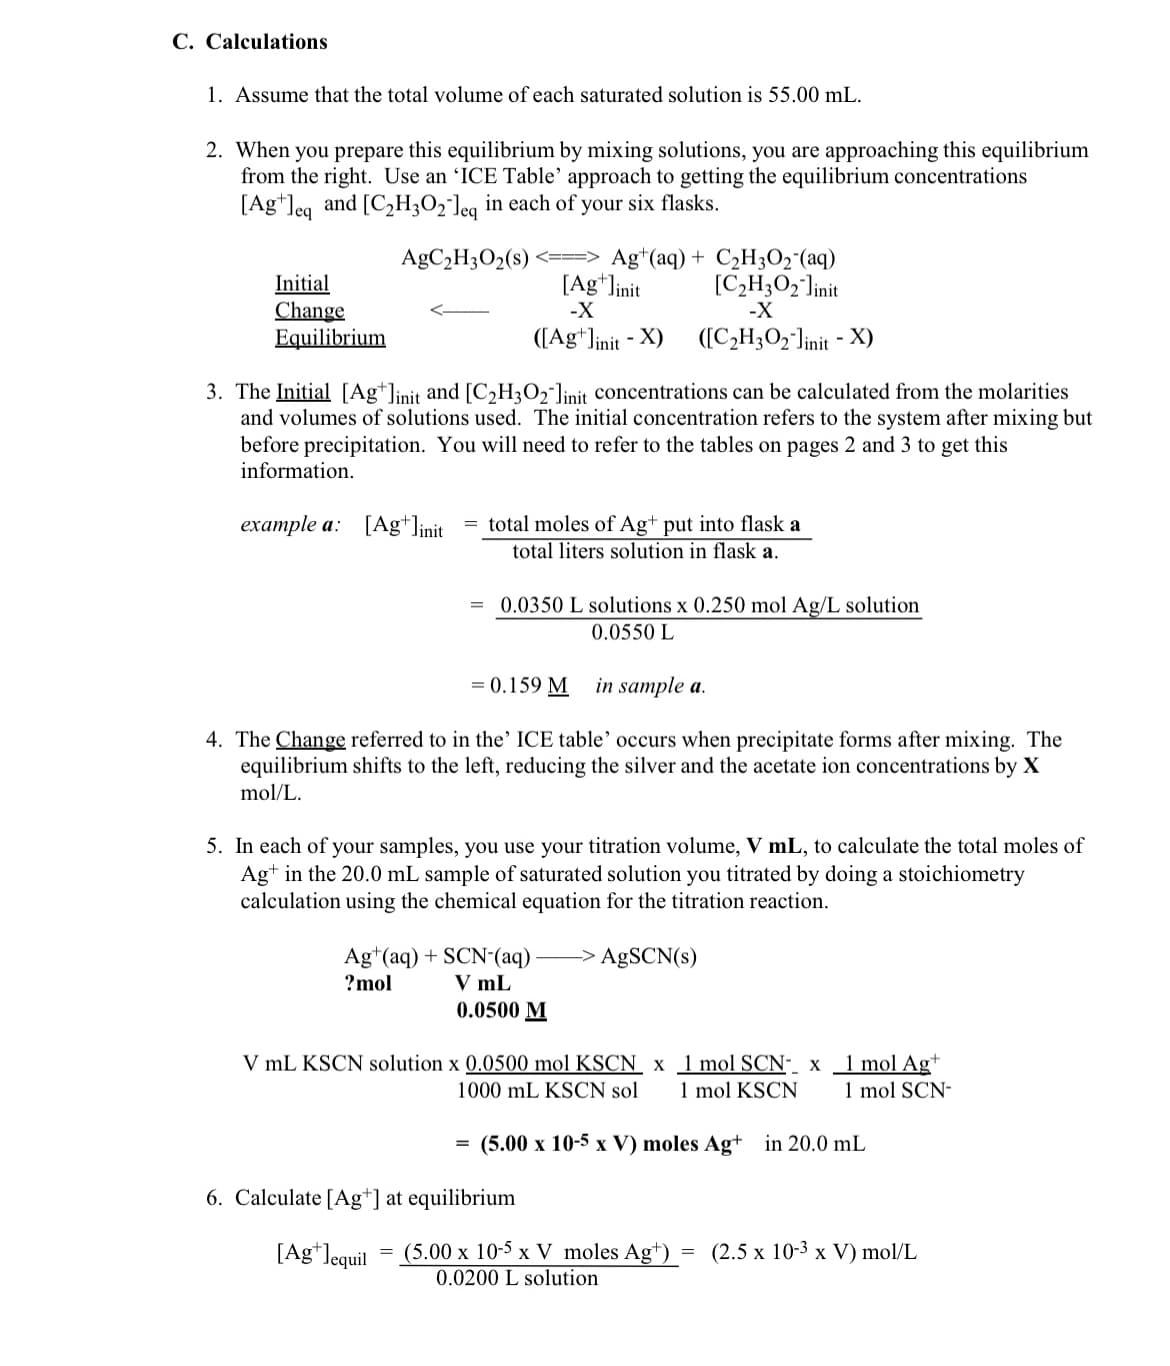 C. Calculations
1. Assume that the total volume of each saturated solution is 55.00 mL.
2. When you prepare this equilibrium by mixing solutions, you are approaching this equilibrium
from the right. Use an 'ICE Table' approach to getting the equilibrium concentrations
[Ag leq and [C₂H302 leq in each of your six flasks.
AgC₂H3O2 (s)
Initial
Change
Equilibrium
3. The Initial [Aglinit and [C₂H3O₂ linit concentrations can be calculated from the molarities
and volumes of solutions used. The initial concentration refers to the system after mixing but
before precipitation. You will need to refer to the tables on pages 2 and 3 to get this
information.
example a: [Ag+]init
Ag+ (aq) + C₂H3O₂ (aq)
[C₂H3O2 linit
[Ag+] init
-X
([Ag+]init - X)
total moles of Ag+ put into flask a
total liters solution in flask a.
in sample a.
4. The Change referred to in the' ICE table' occurs when precipitate forms after mixing. The
equilibrium shifts to the left, reducing the silver and the acetate ion concentrations by X
mol/L.
=
=
0.0350 L solutions x 0.250 mol Ag/L solution
0.0550 L
= 0.159 M
-X
([C₂H3O2-linit - X)
5. In each of your samples, you use your titration volume, V mL, to calculate the total moles of
Ag+ in the 20.0 mL sample of saturated solution you titrated by doing a stoichiometry
calculation using the chemical equation for the titration reaction.
Ag+ (aq) + SCN- (aq) -> AgSCN(s)
?mol
V mL
0.0500 M
V mL KSCN solution x 0.0500 mol KSCN x
1000 mL KSCN sol
6. Calculate [Ag+] at equilibrium
[Ag*lequil
1 mol SCN- x
1 mol KSCN
1 mol Ag+
1 mol SCN-
(5.00 x 10-5 x V) moles Ag+ in 20.0 mL
(5.00 x 10-5 x V moles Ag+) = (2.5 x 10-3 x V) mol/L
0.0200 L solution